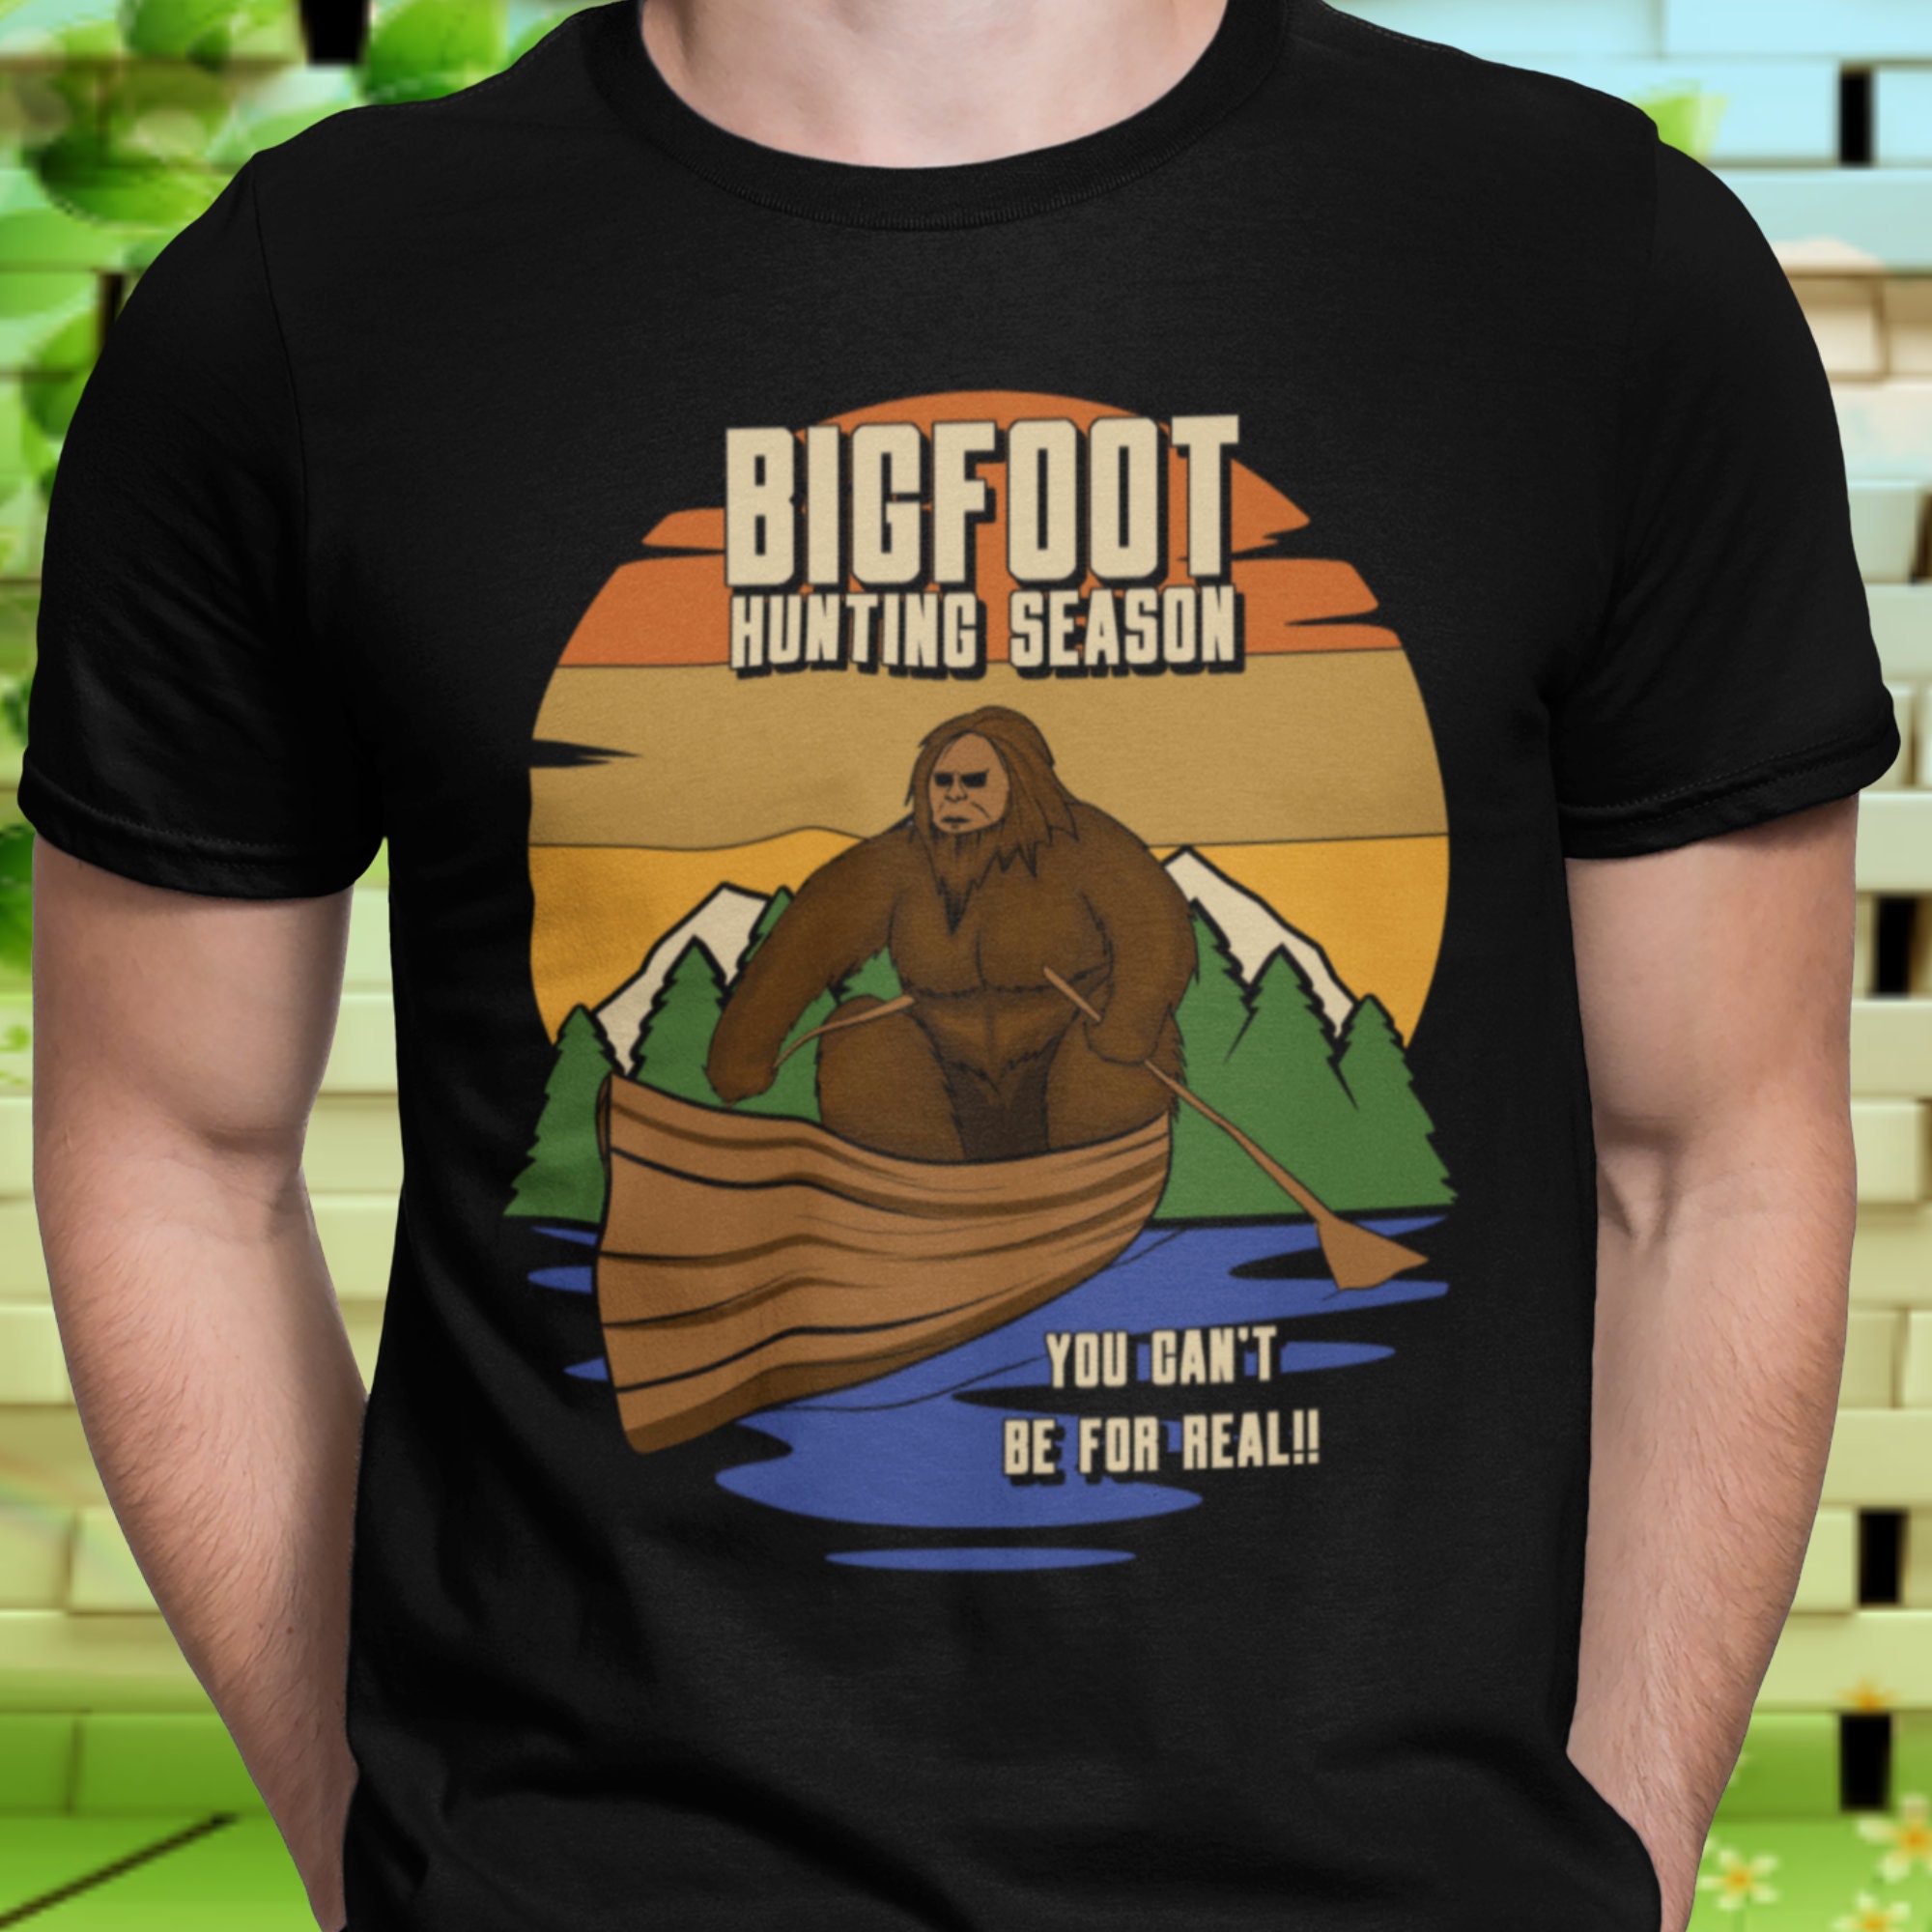 Bigfoot Hunting Season T Shirt Funny Sasquatch You Can T Be For Real To Hide Tee Oklahoma Yeti